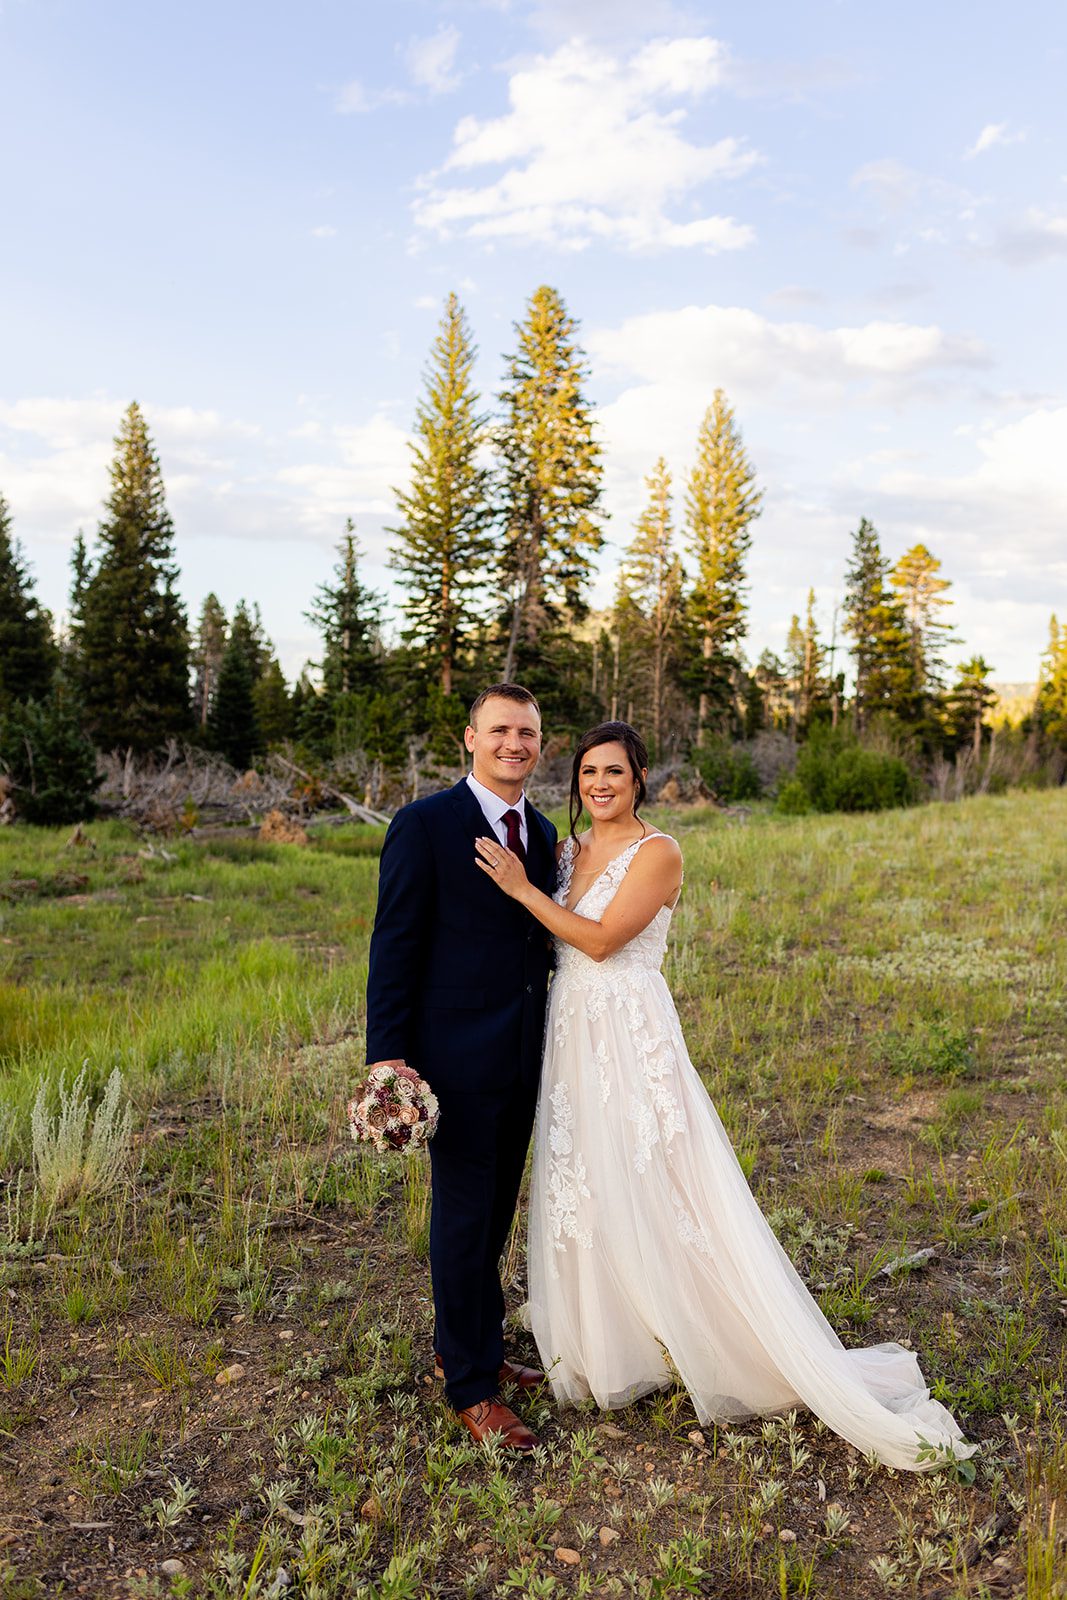 Bride and groom smiling at camera after their sprague lake elopement ceremony